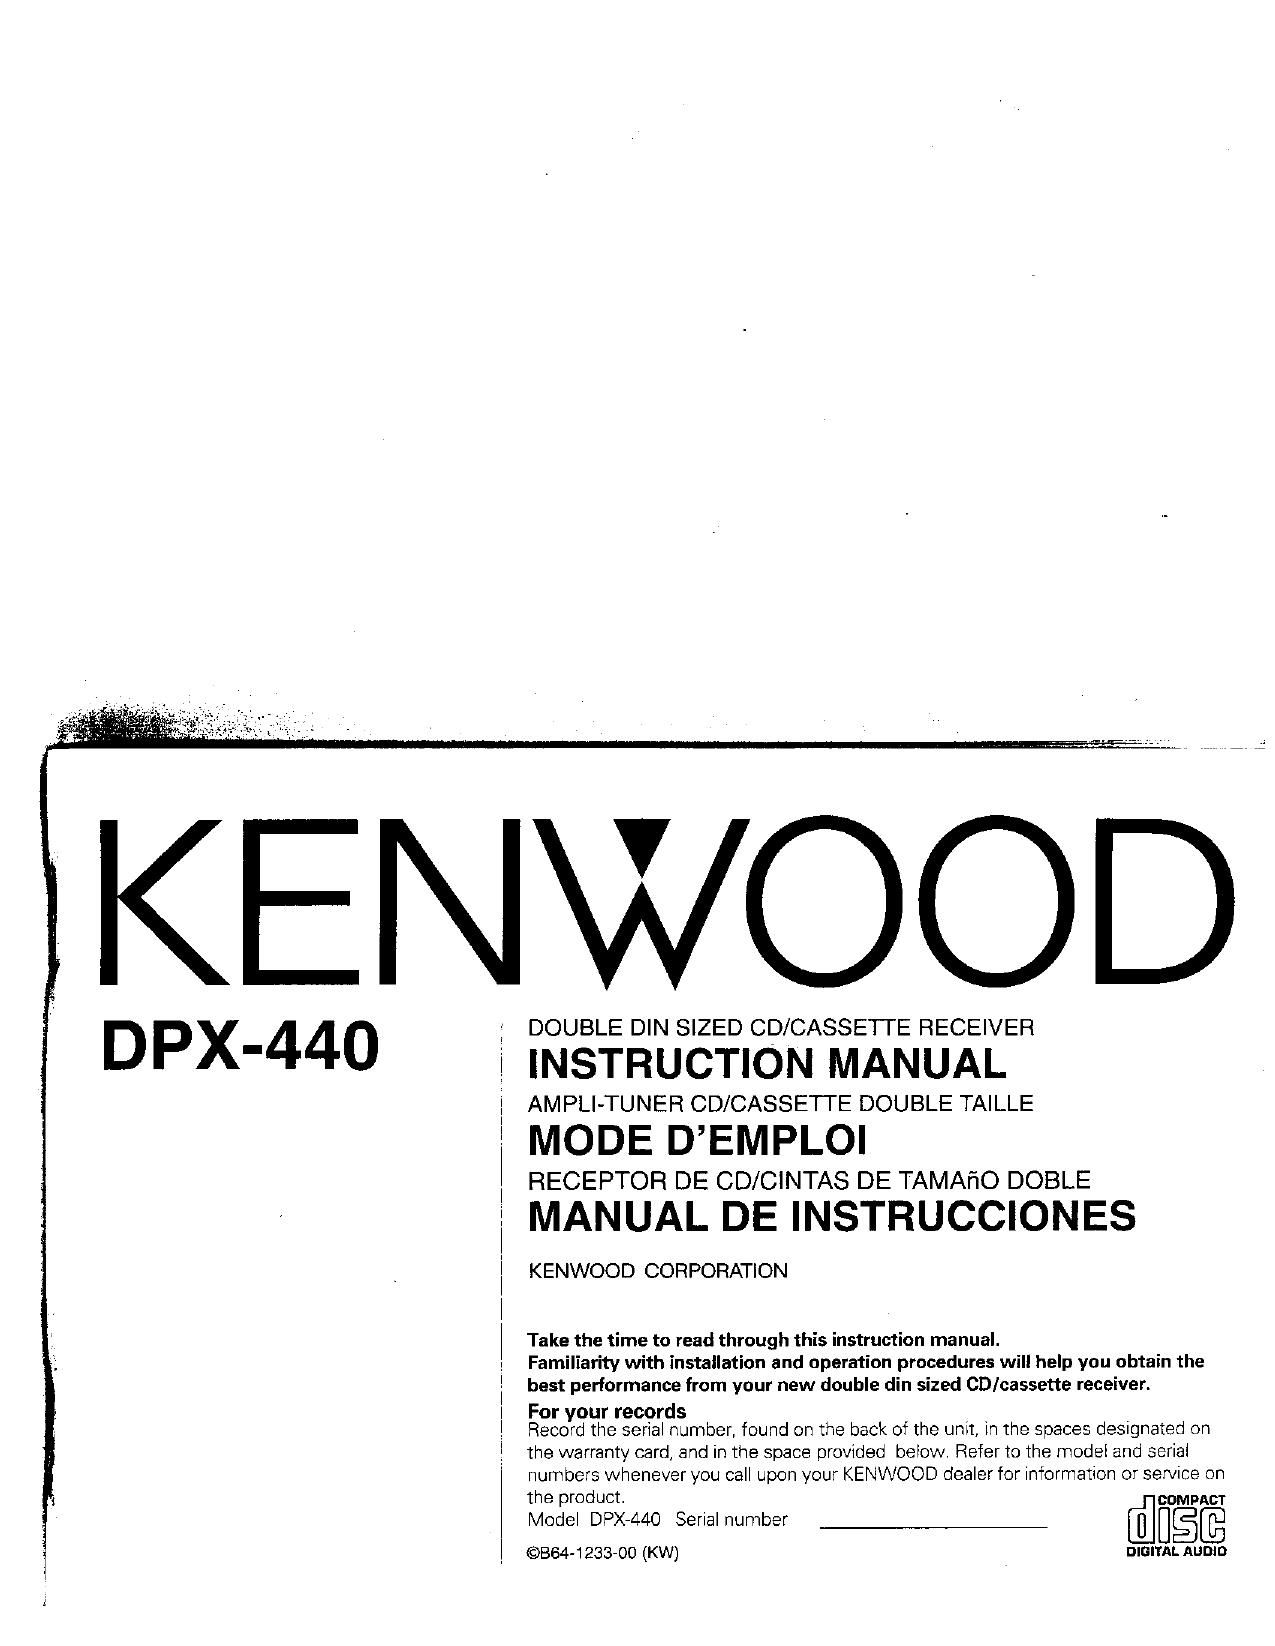 Kenwood DPX 440 Owners Manual